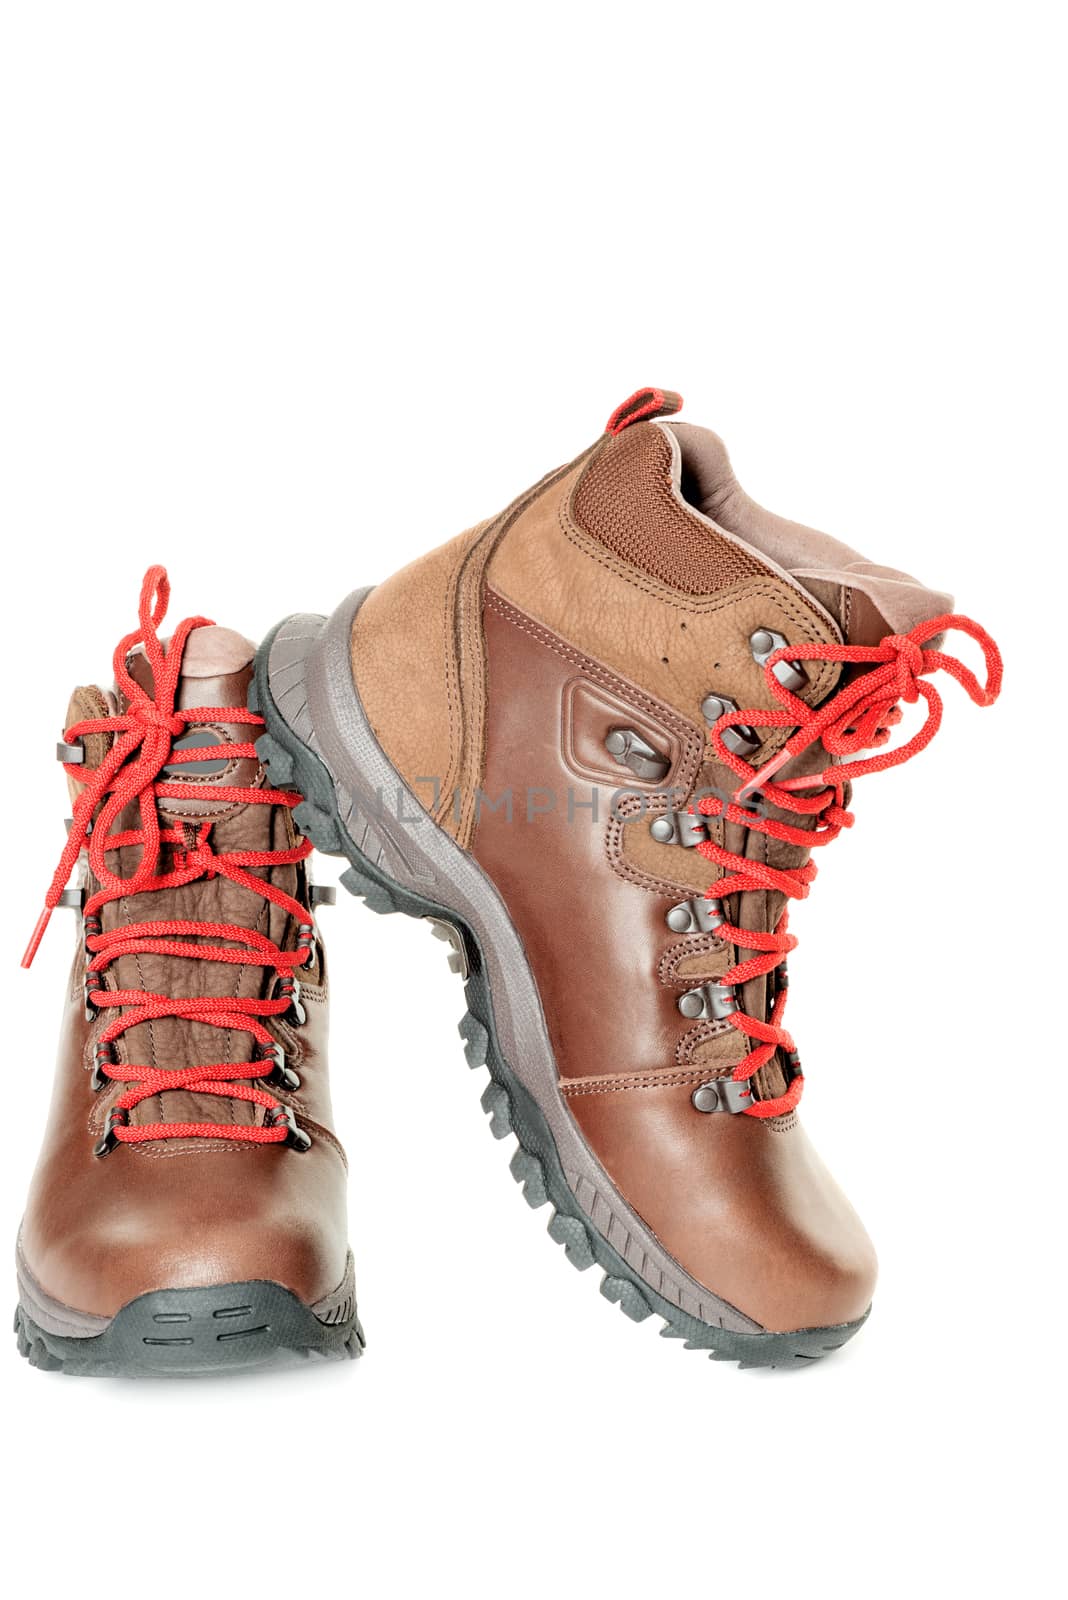 pair of leather hiking boots isolated on white artistic by Nanisimova